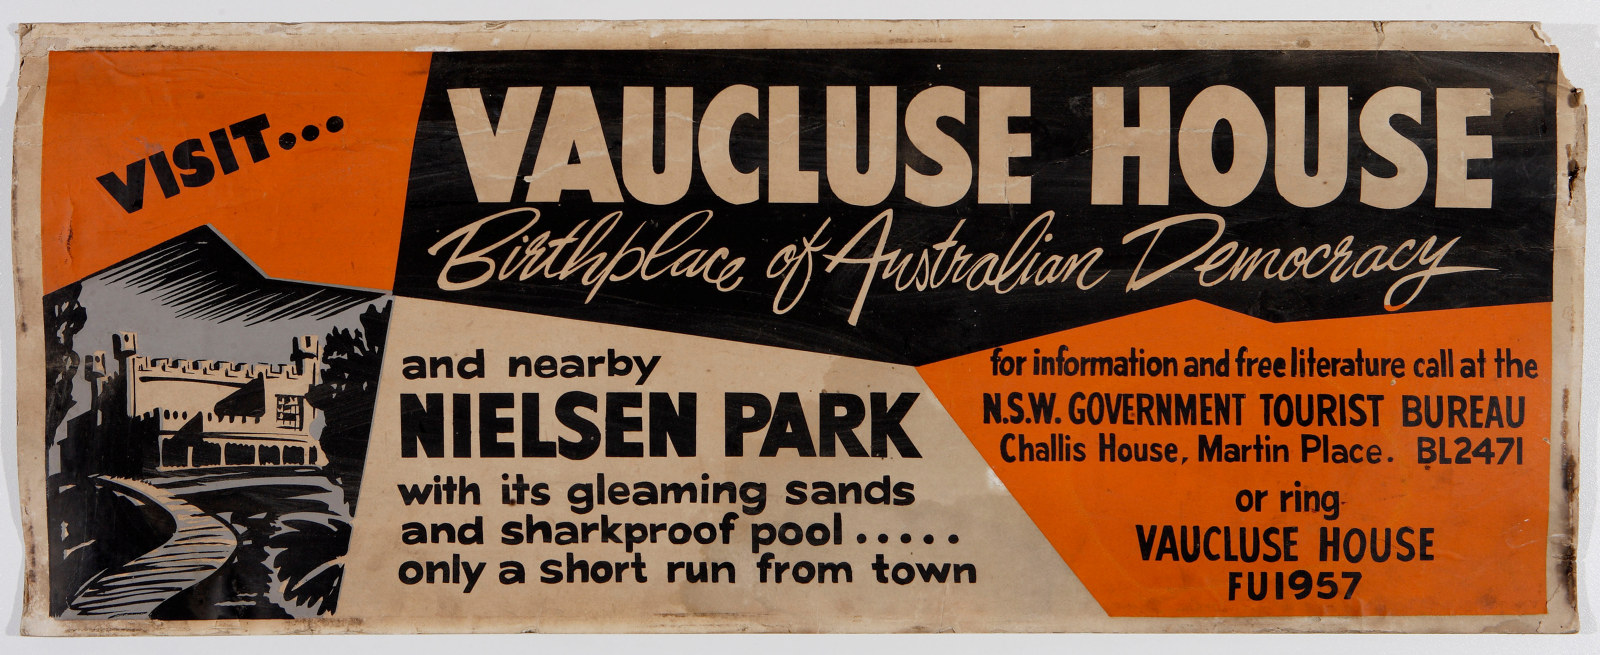 Poster showing Vaulcluse House with text that reads: Visit.. Vaucluse House and nearby Nielsen Park.